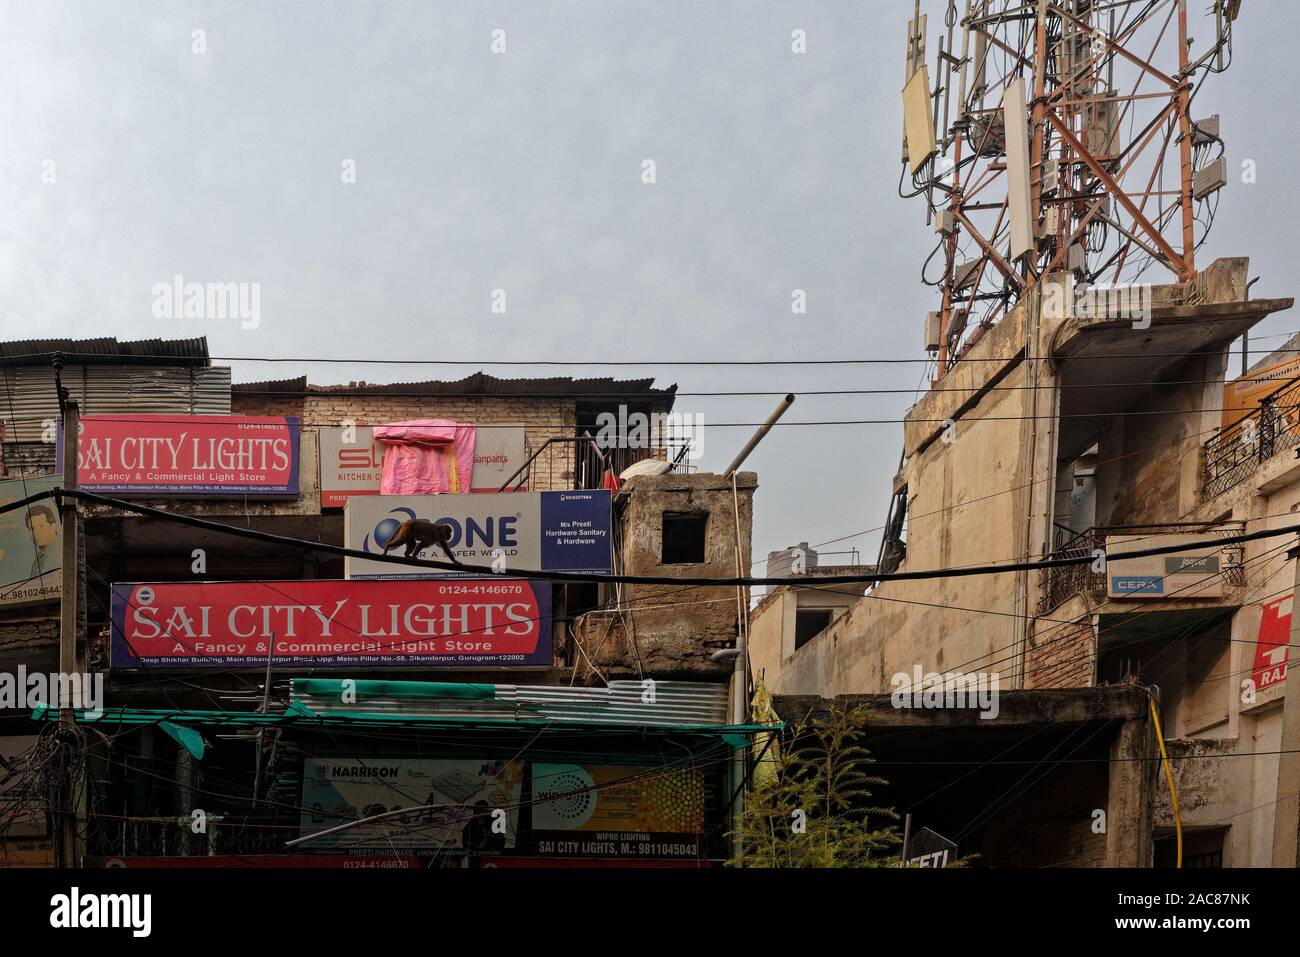 Monkey walking along cables with advertising hoardings behind for shops in Sikandapur, Gurgaon, Haryana, India Stock Photo